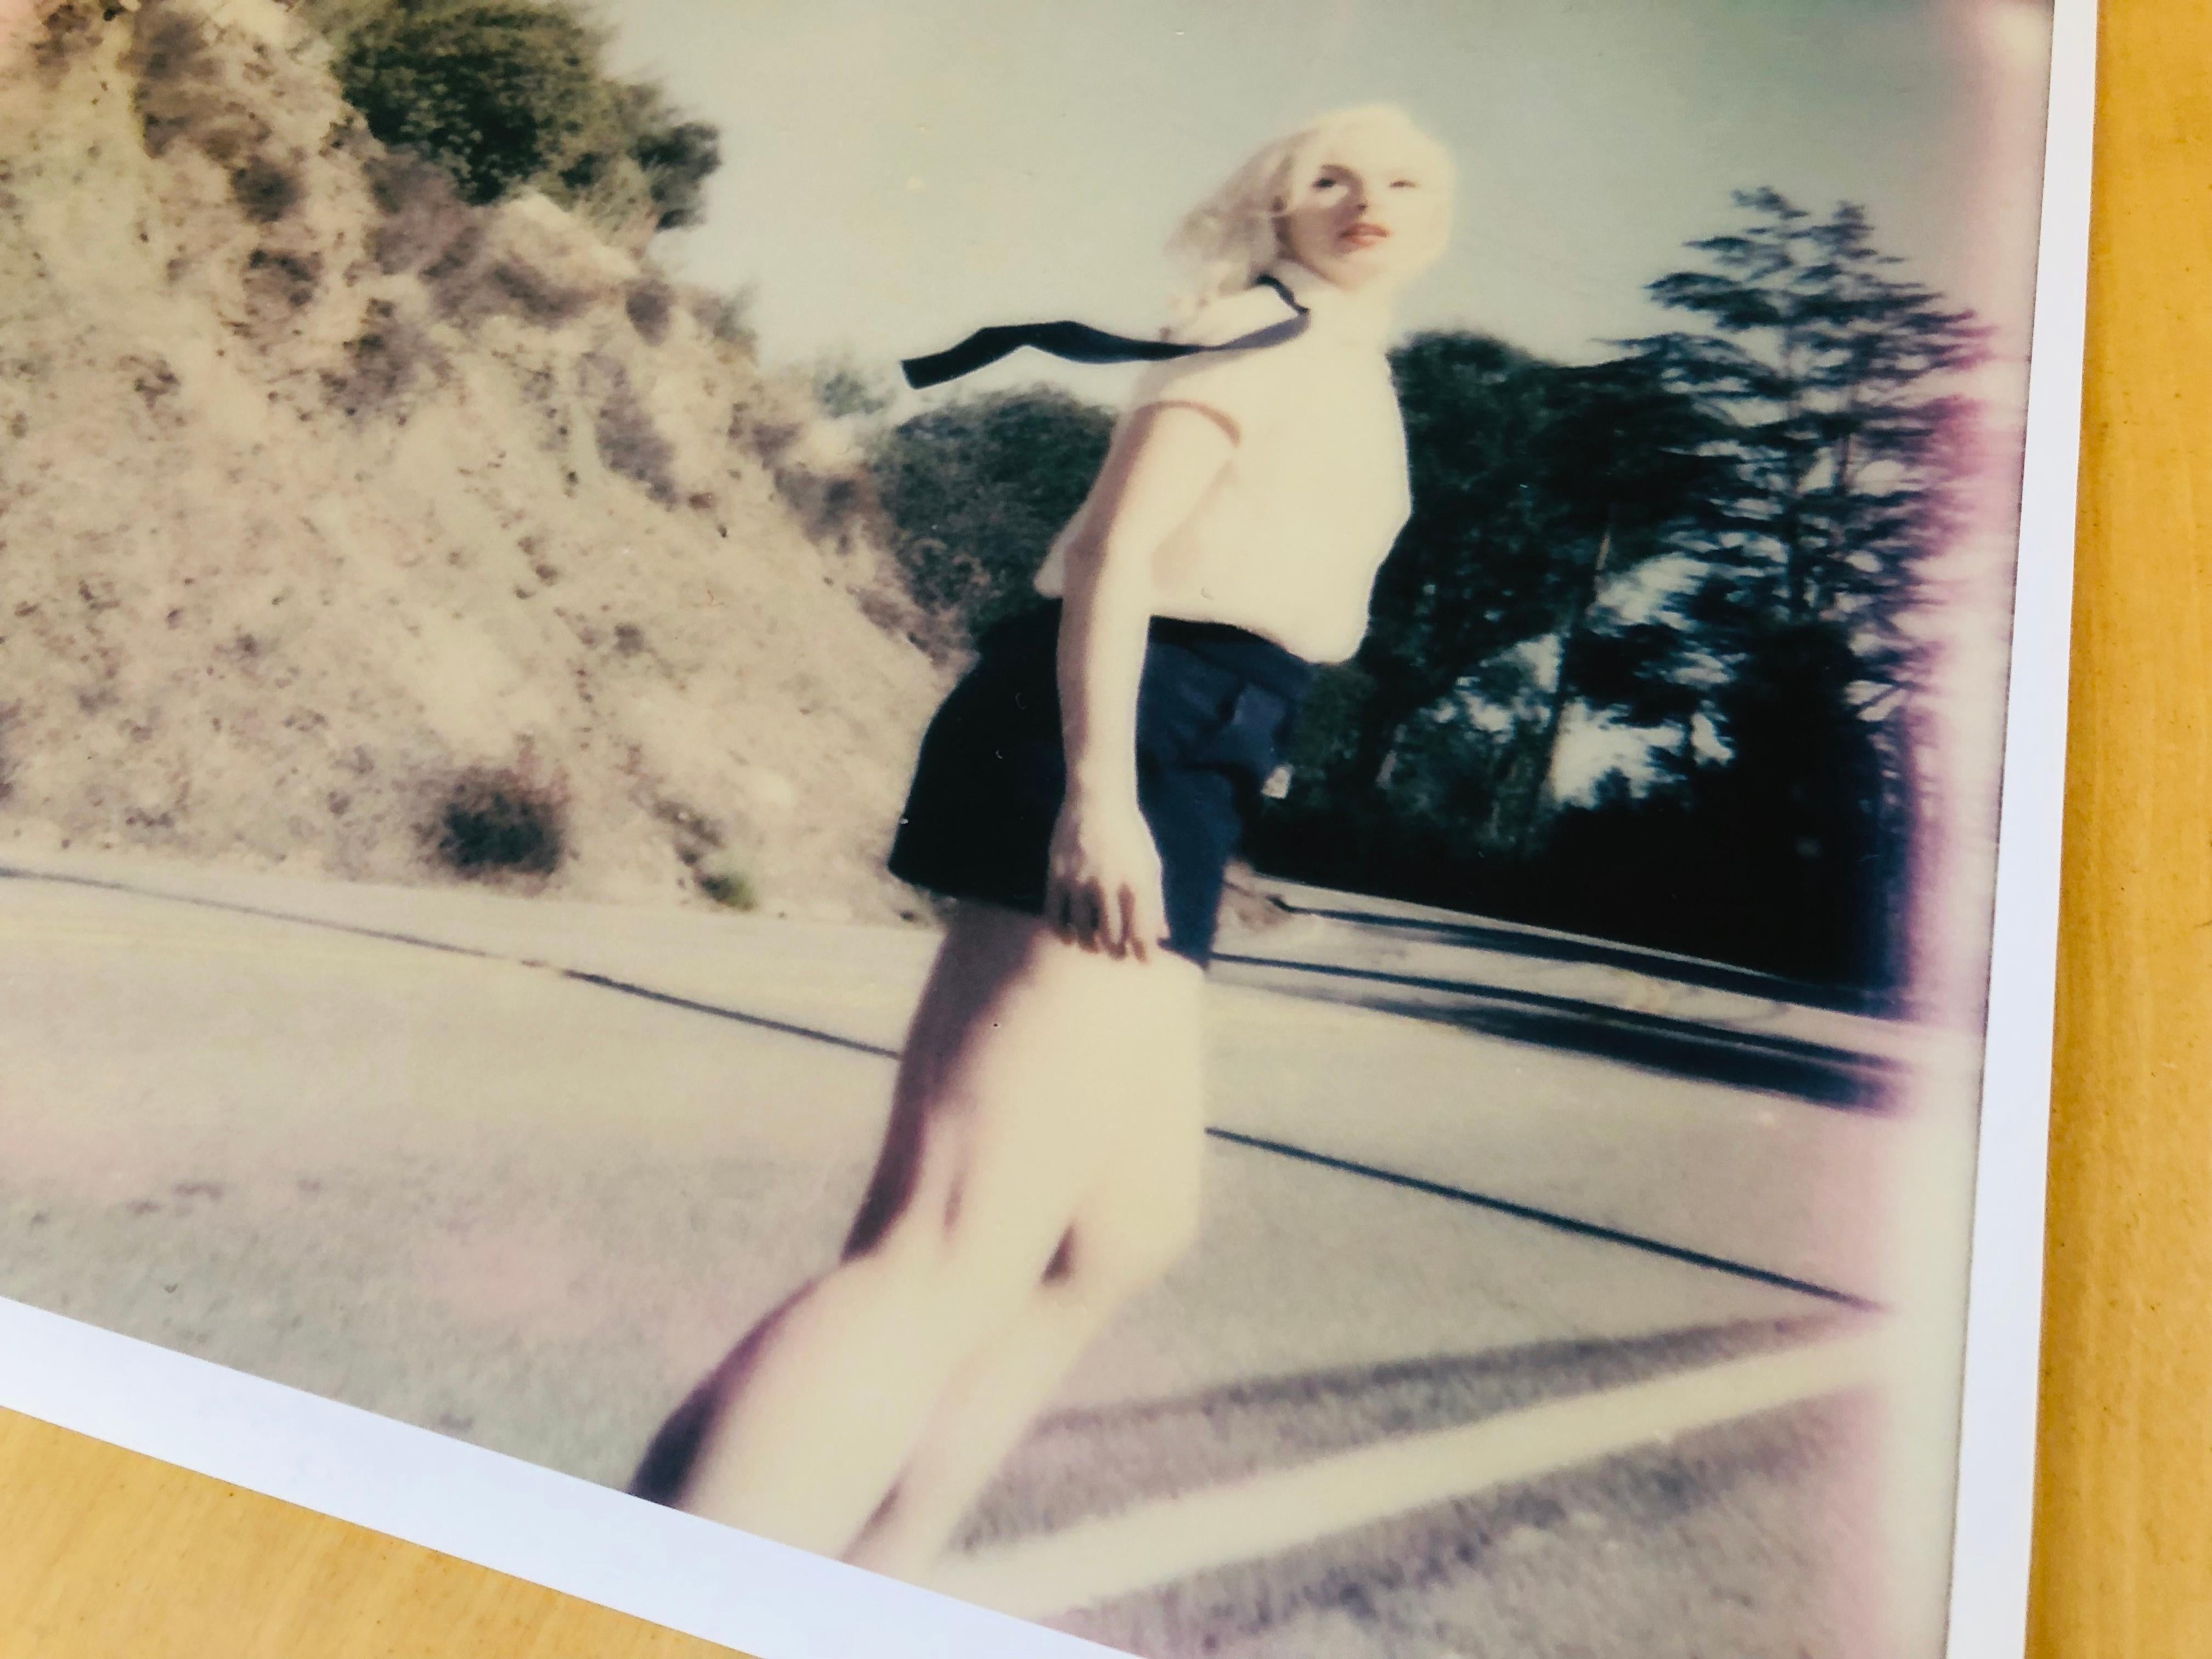 Mulholland Drive, 2016 -

Edition 1/7. 
Archival Color Print on Pearl photo paper, based on a Polaroid. 
Signed on the back by the artist. 
Not mounted.  

Whether in color and black and white, van Driessche’s photos marry the atmospheric qualities